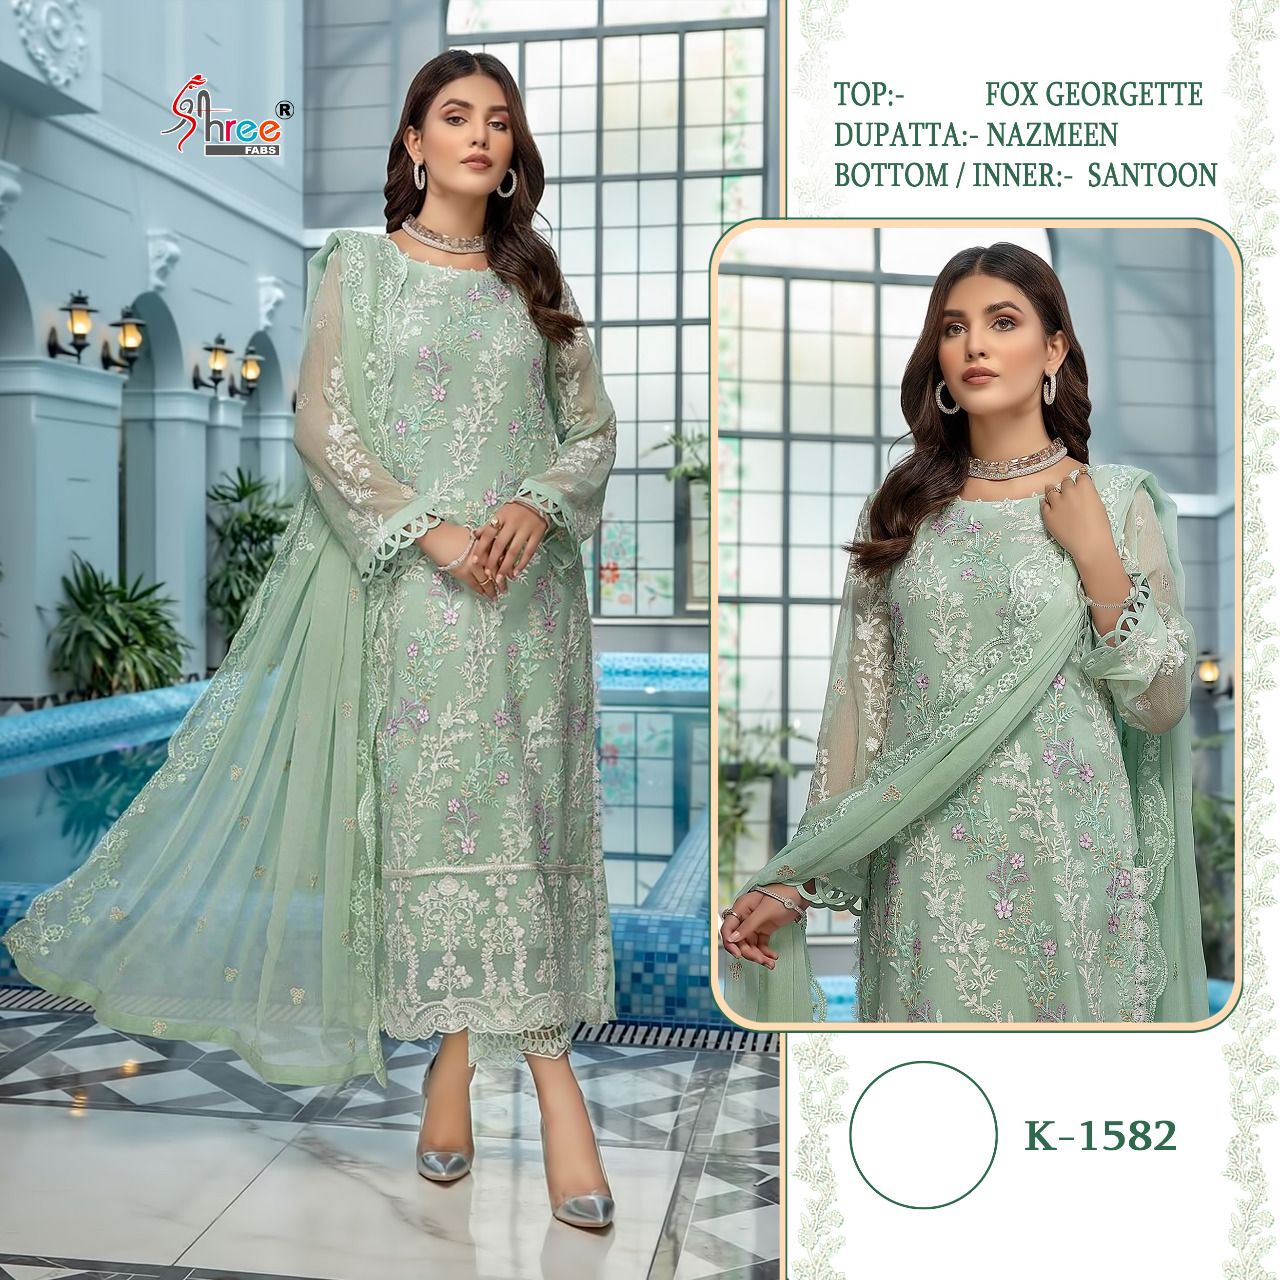 SHREE FABS K 1582 PAKISTANI SUITS IN LOWEST PRICE